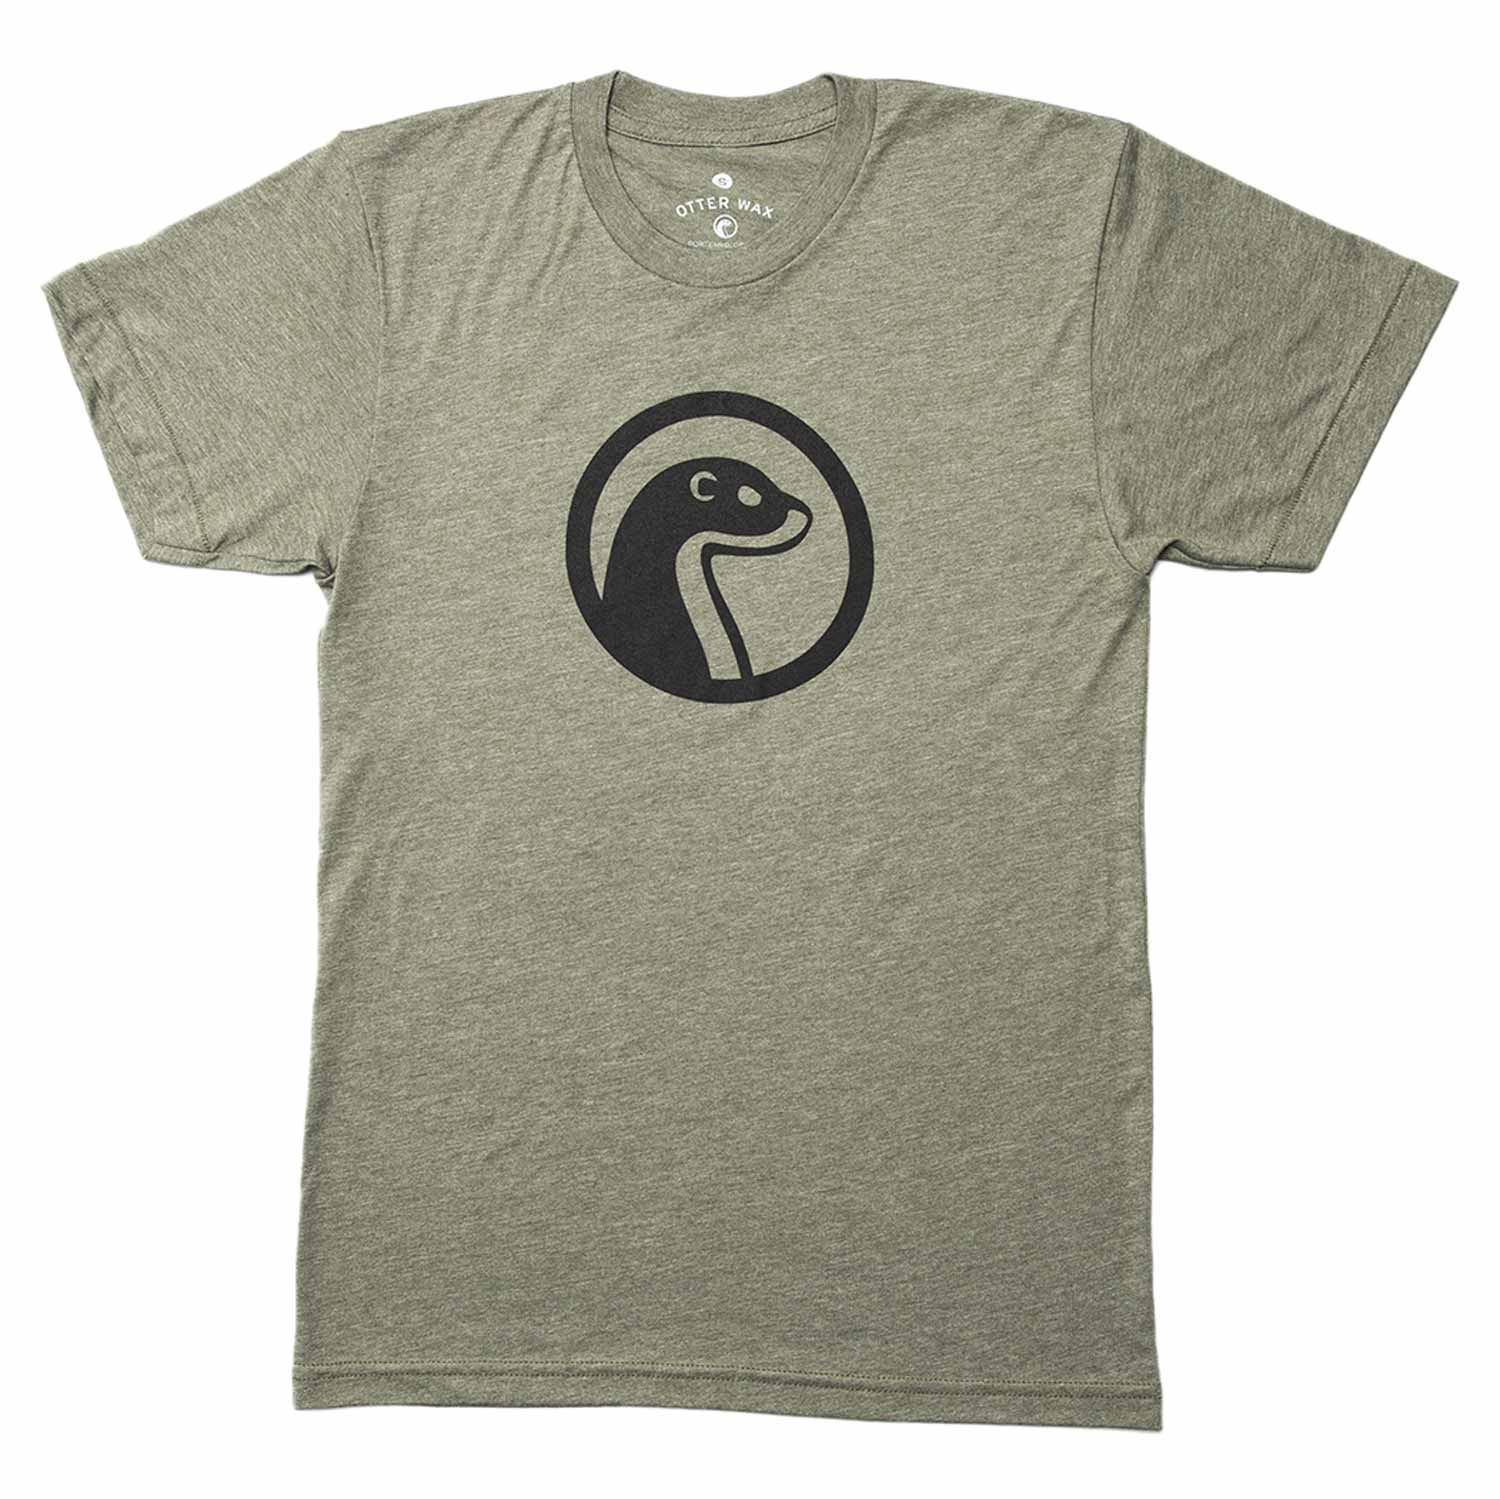 Otter Wax Fitted Cotton Unisex T-Shirt With Black Print Logo Front And Back In Heather Forest Lieutenant Green Color Made In The USA